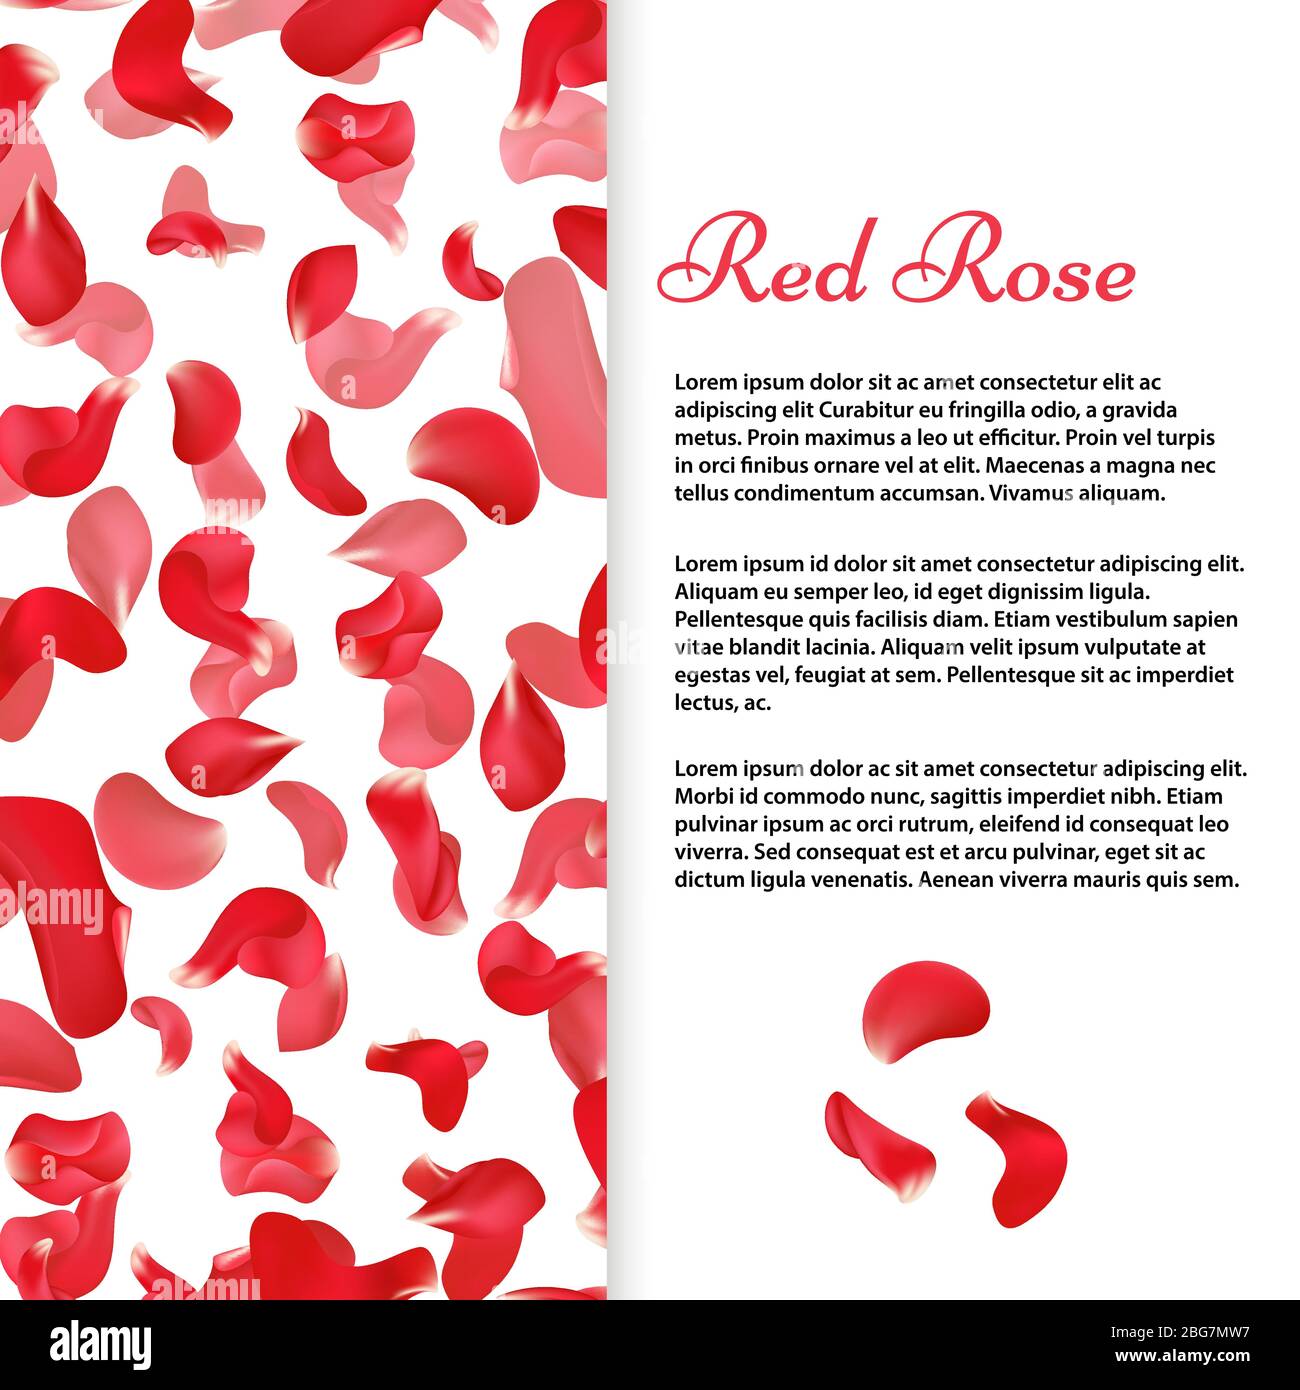 Poster Background of red rose petals 